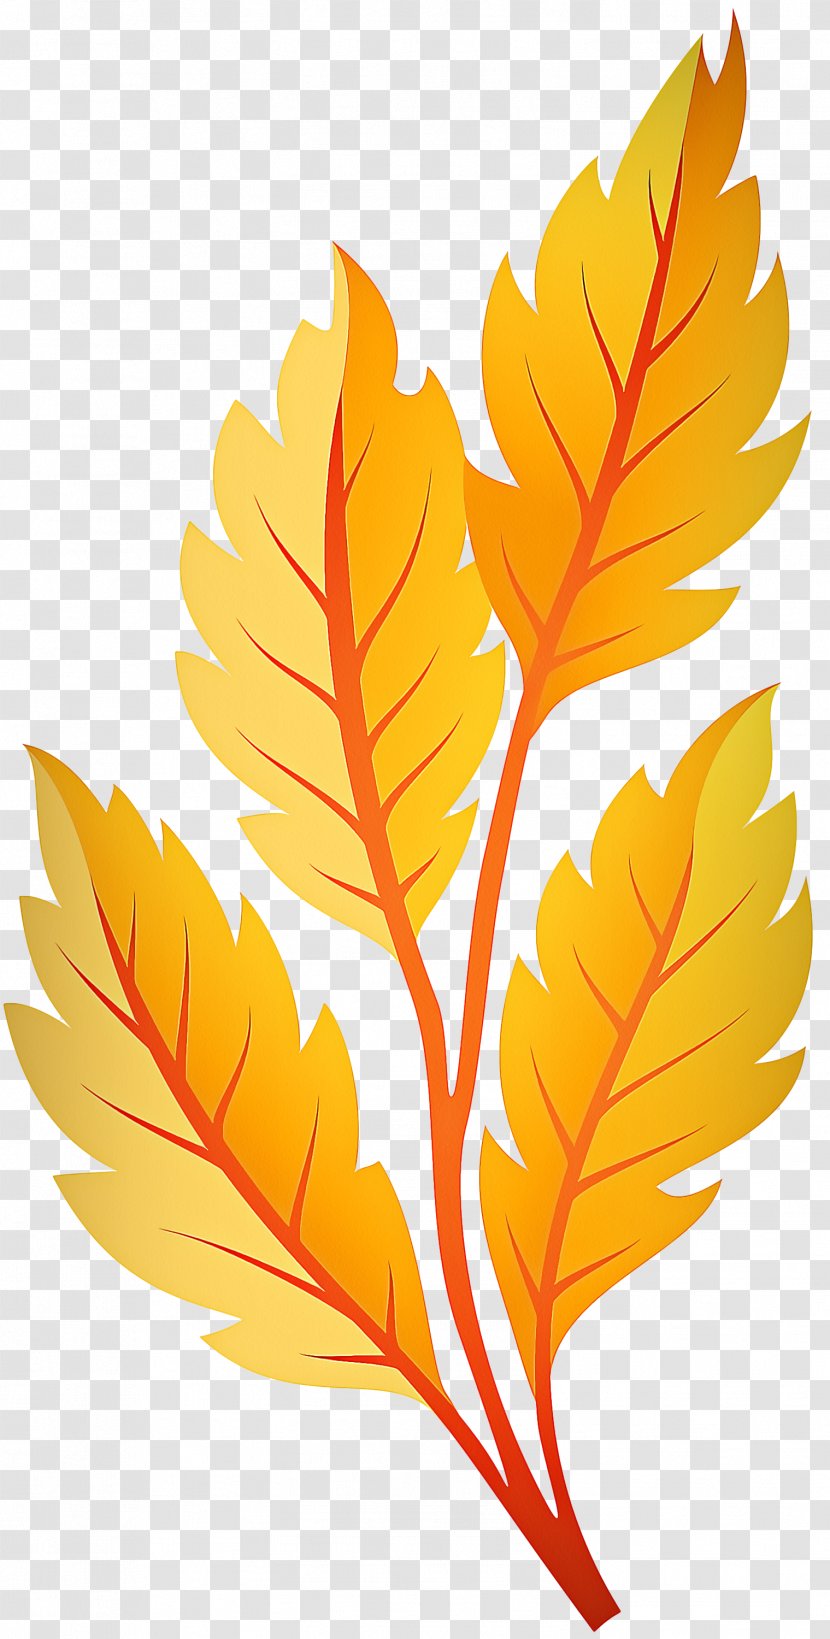 Red Maple Tree - Plant - Flower Plane Transparent PNG